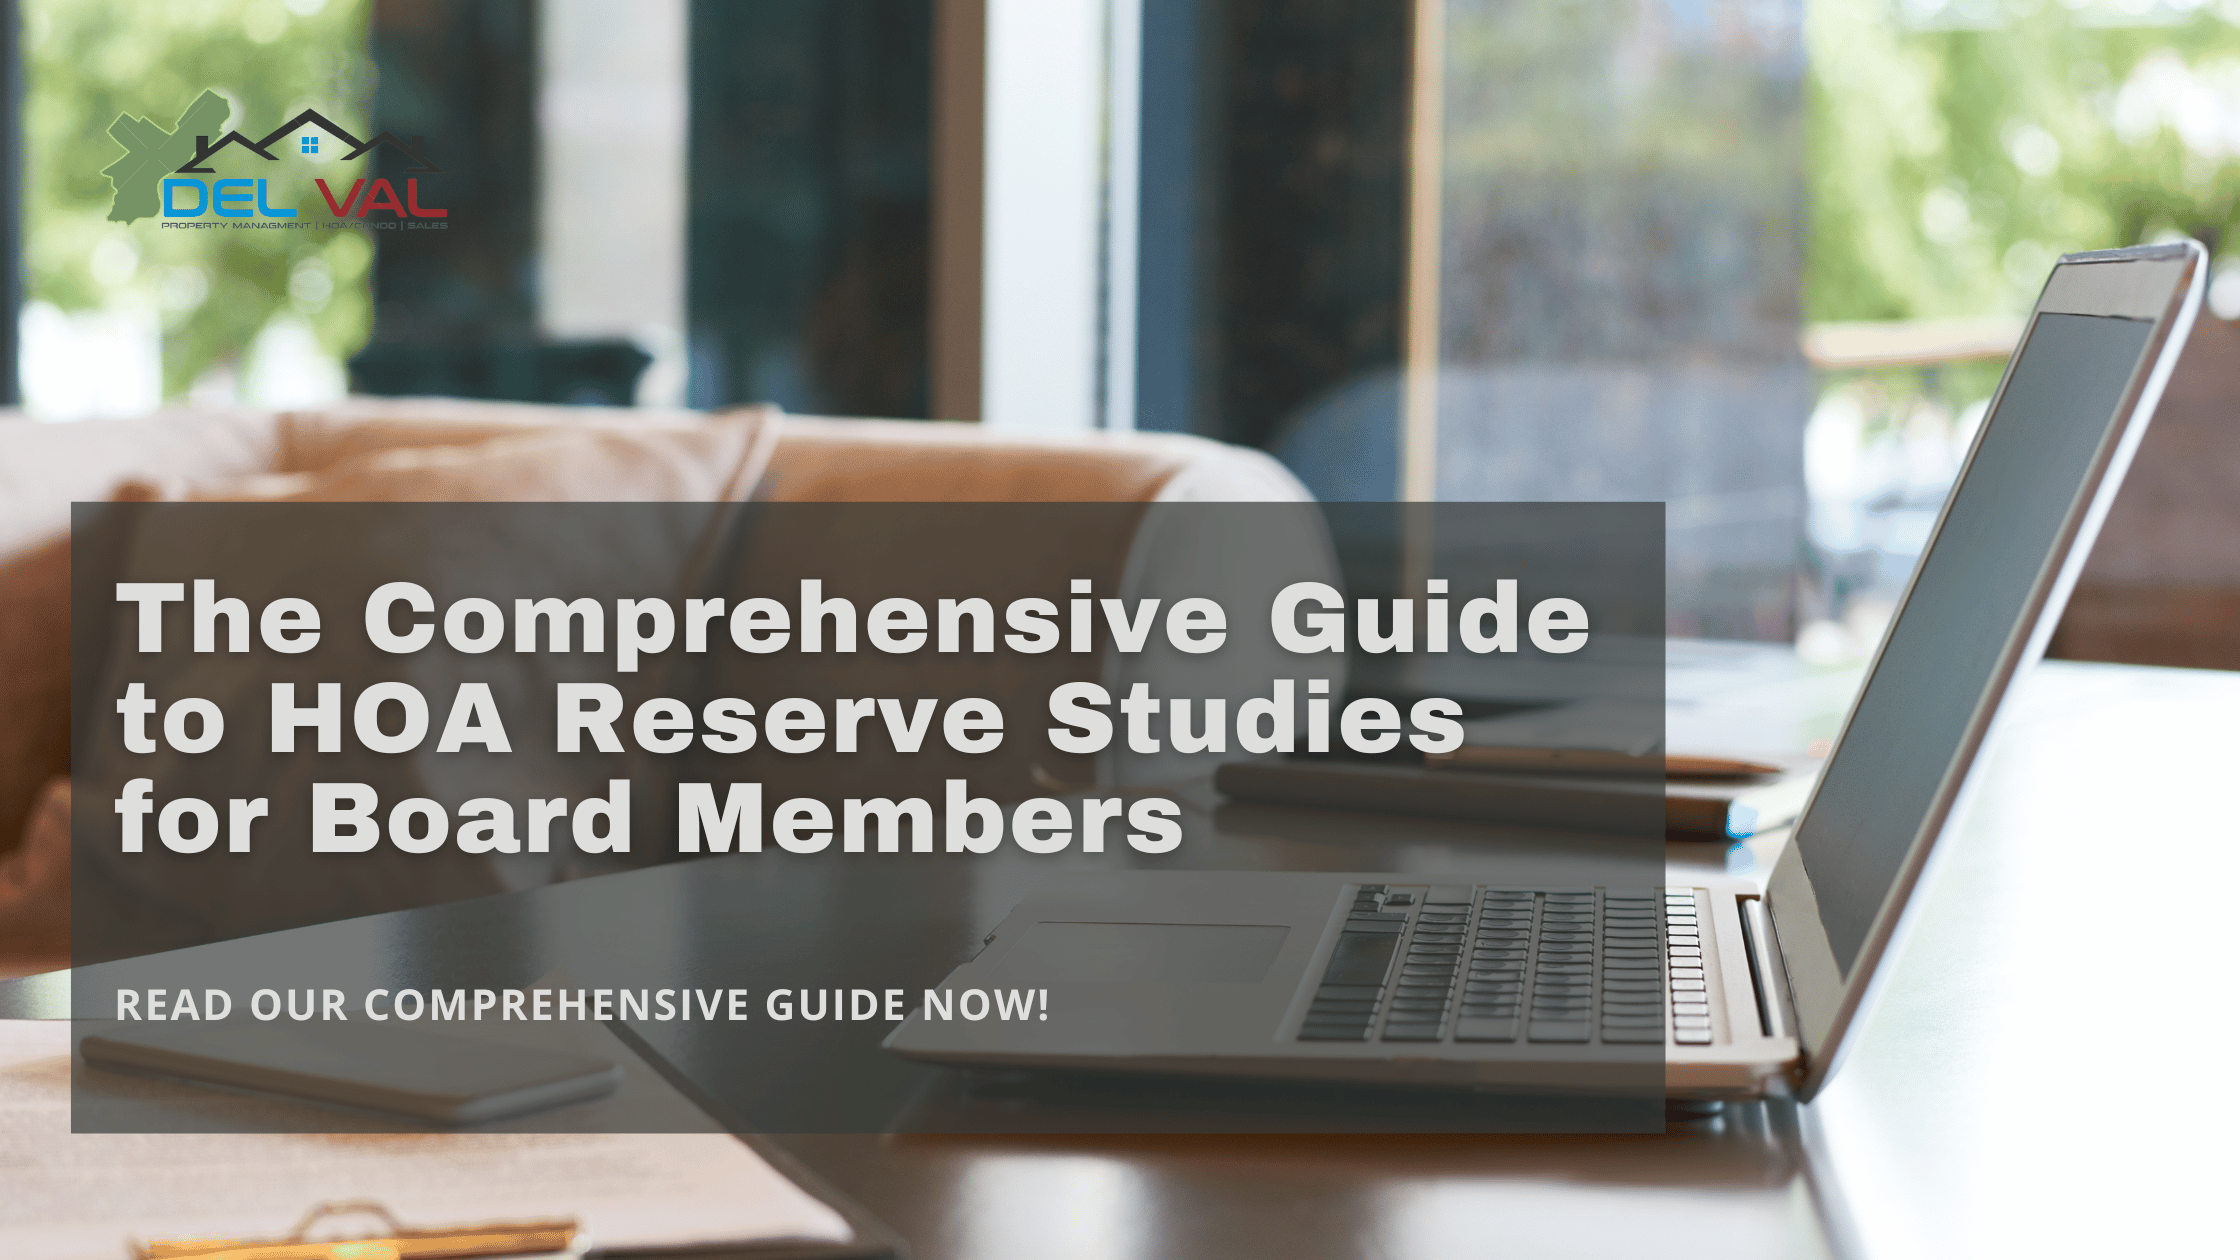 The Comprehensive Guide to HOA Reserve Studies for Board Members